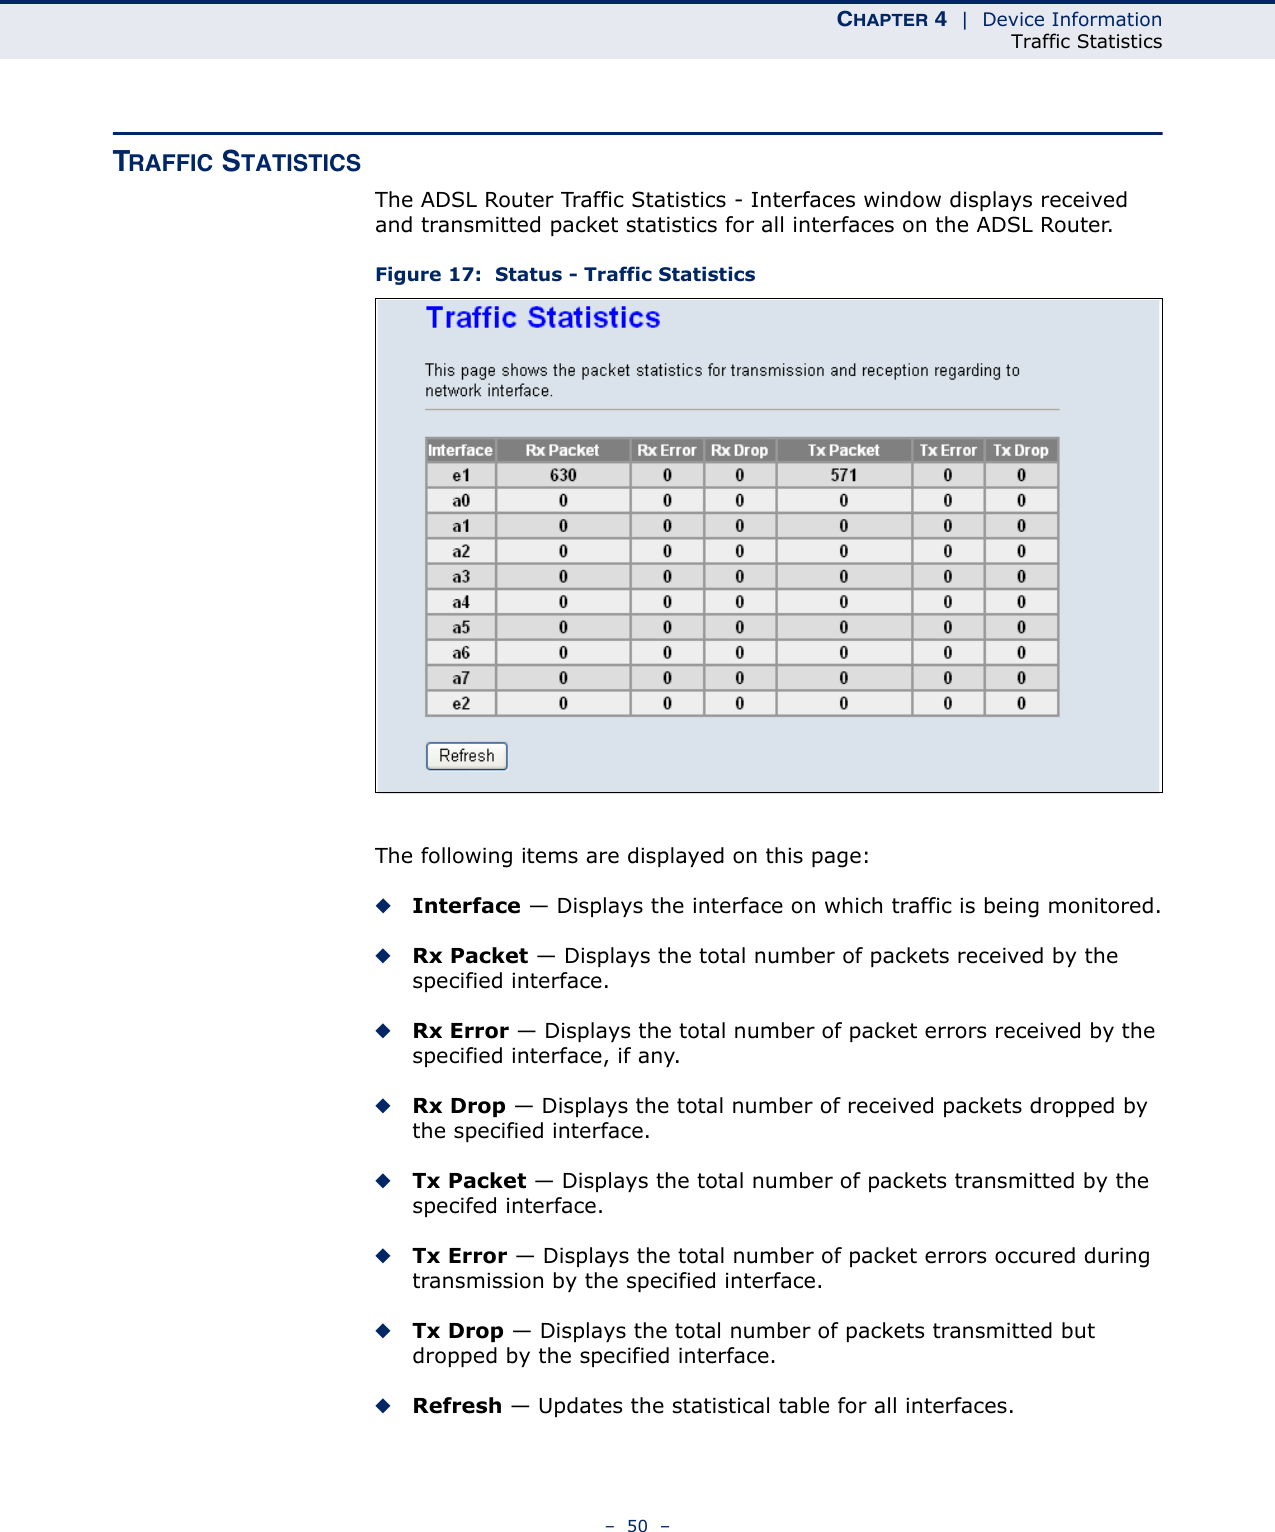 CHAPTER 4  |  Device InformationTraffic Statistics–  50  –TRAFFIC STATISTICSThe ADSL Router Traffic Statistics - Interfaces window displays received and transmitted packet statistics for all interfaces on the ADSL Router.Figure 17:  Status - Traffic StatisticsThe following items are displayed on this page:◆Interface — Displays the interface on which traffic is being monitored.◆Rx Packet — Displays the total number of packets received by the specified interface.◆Rx Error — Displays the total number of packet errors received by the specified interface, if any.◆Rx Drop — Displays the total number of received packets dropped by the specified interface.◆Tx Packet — Displays the total number of packets transmitted by the specifed interface.◆Tx Error — Displays the total number of packet errors occured during transmission by the specified interface.◆Tx Drop — Displays the total number of packets transmitted but dropped by the specified interface.◆Refresh — Updates the statistical table for all interfaces.